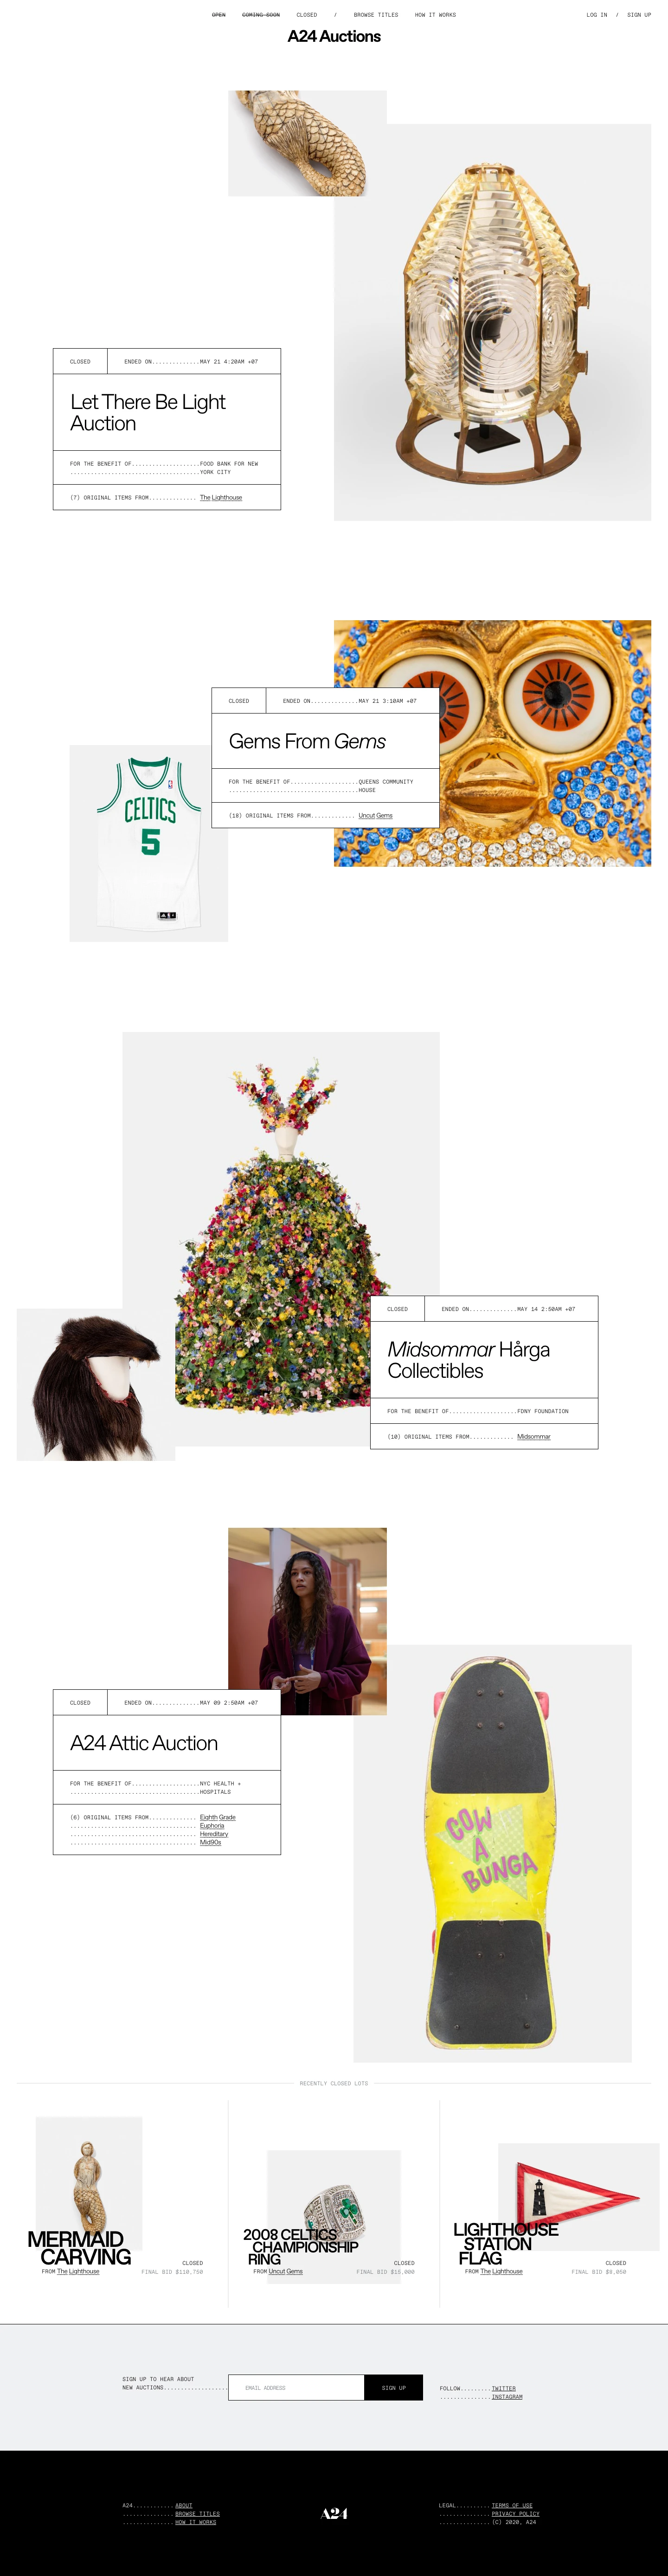 A24 Auctions Landing Page Example: Iconic, one-of-a-kind props, wardrobe items, and set pieces from Euphoria, Midsommar, Uncut Gems, and more. A24 Auctions benefits New York City workers and families impacted by the COVID-19 crisis.